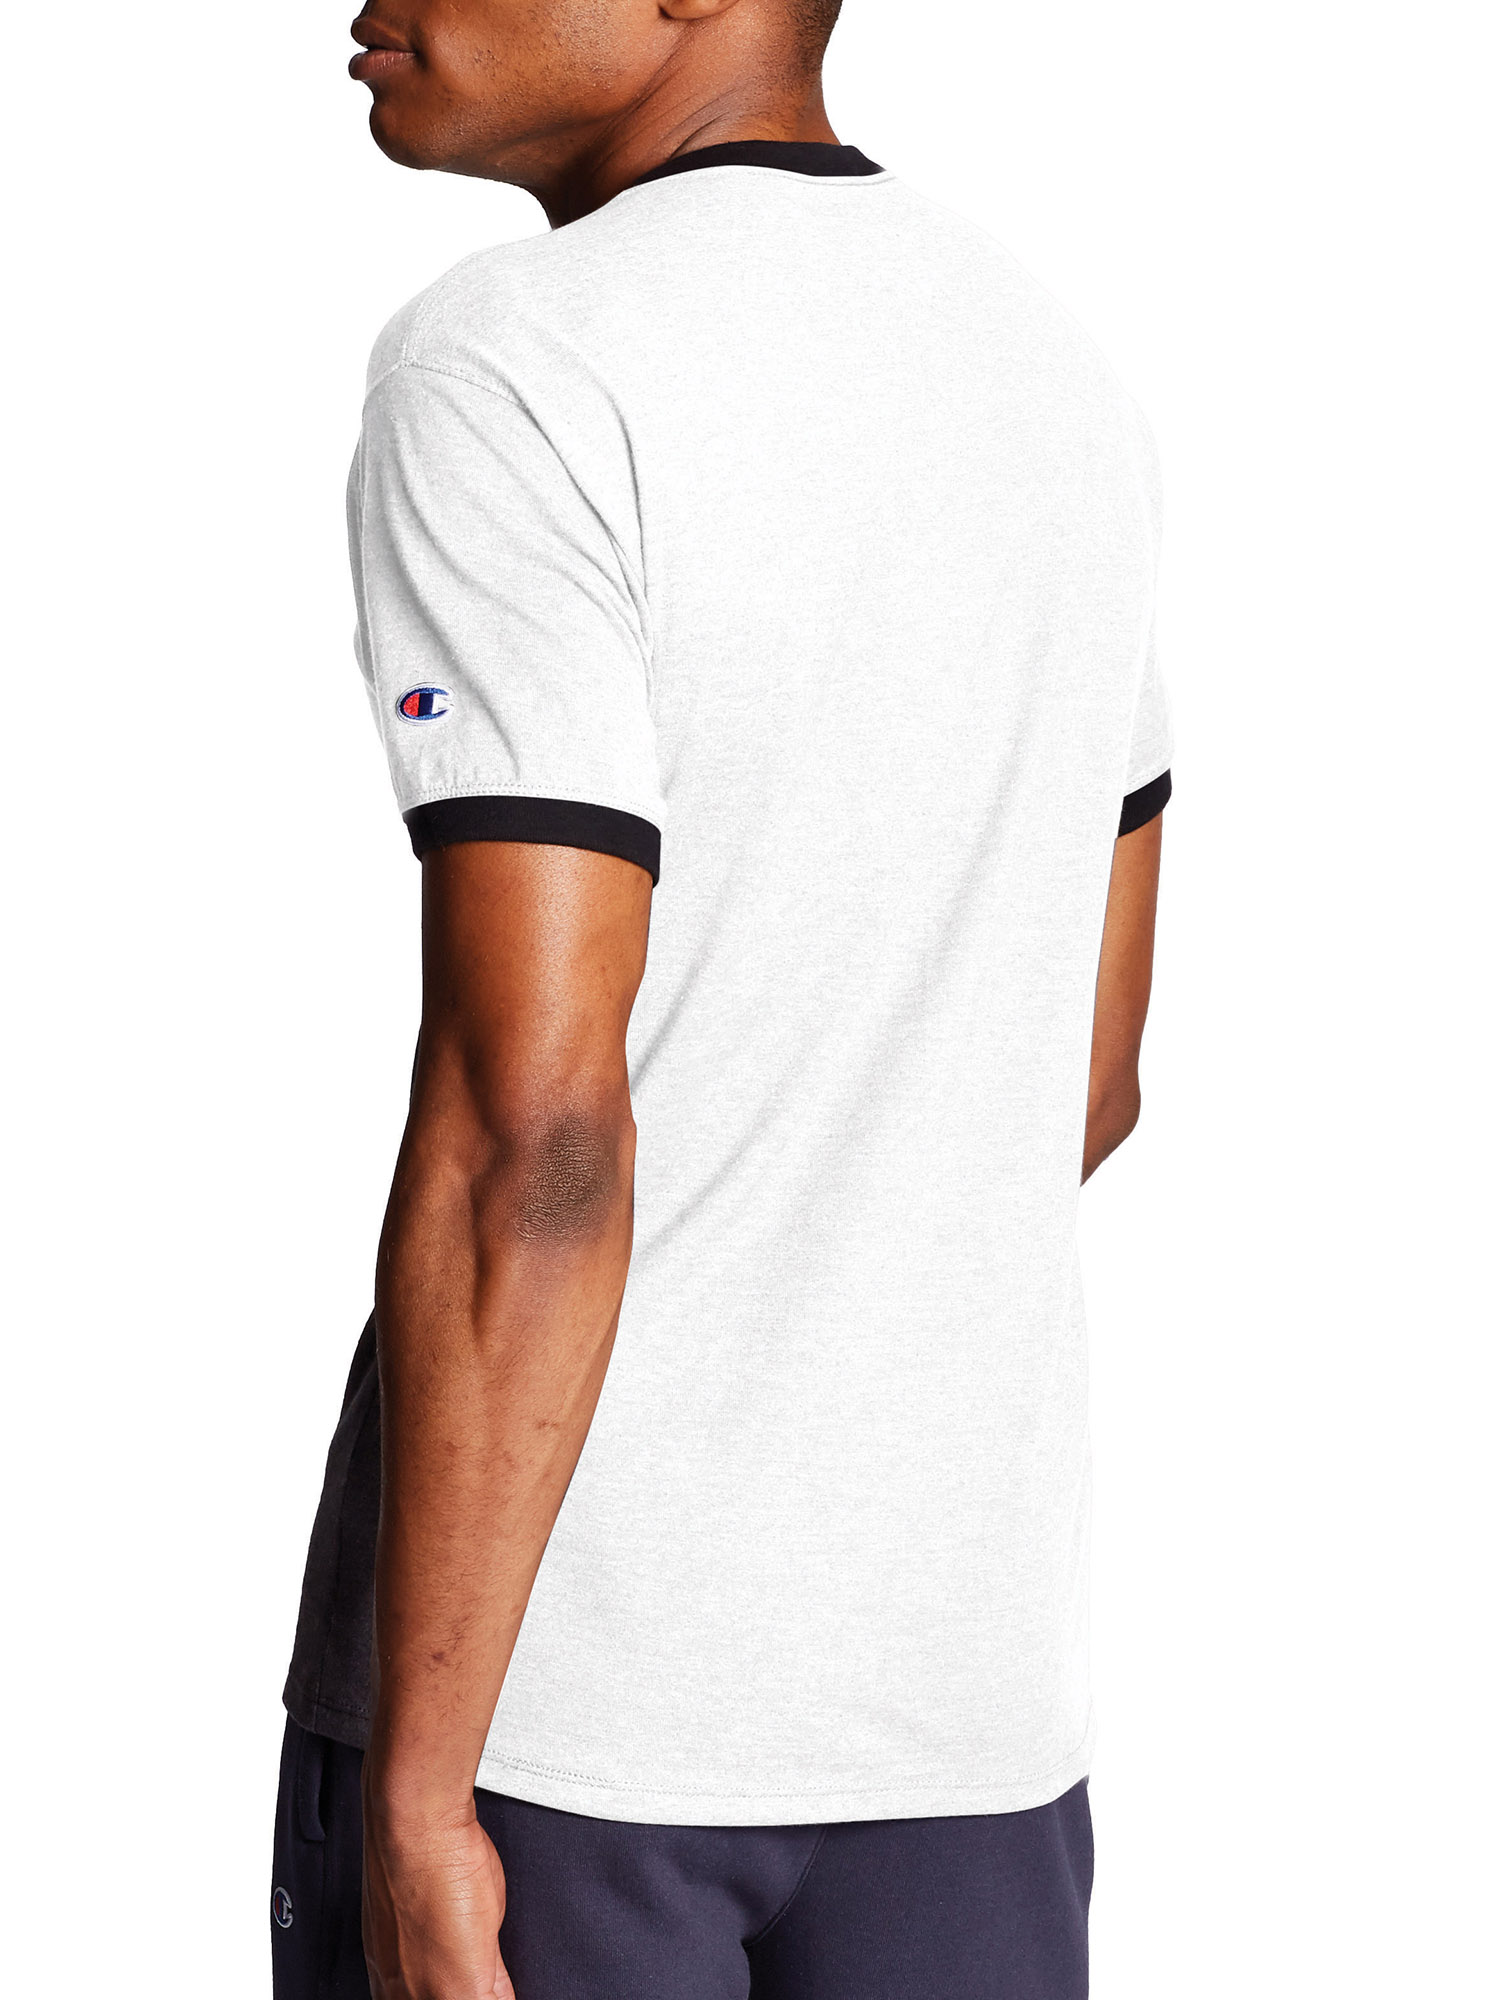 Champion Men's Classic Jersey Ringer Tee - image 5 of 7